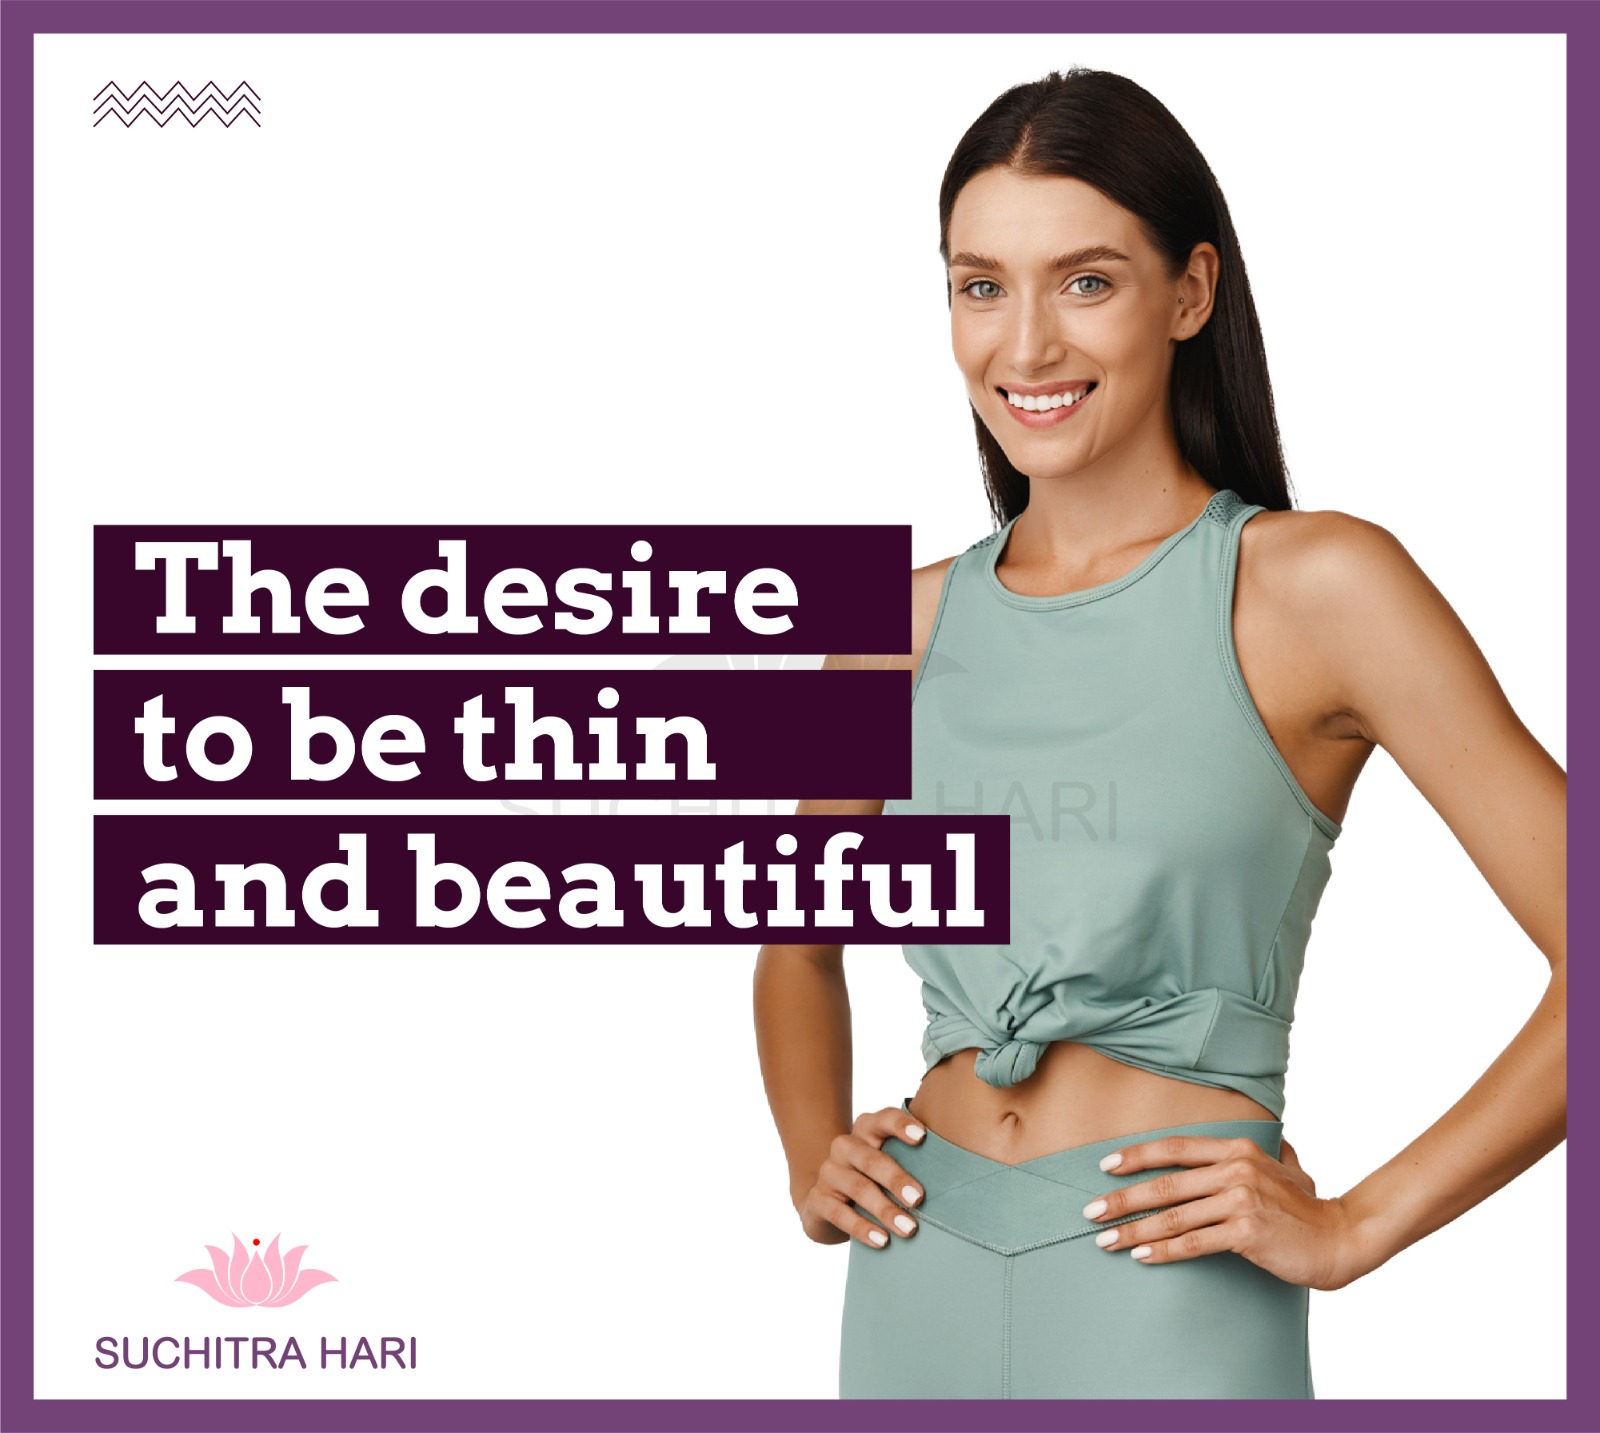 The desire to be thin and beautiful